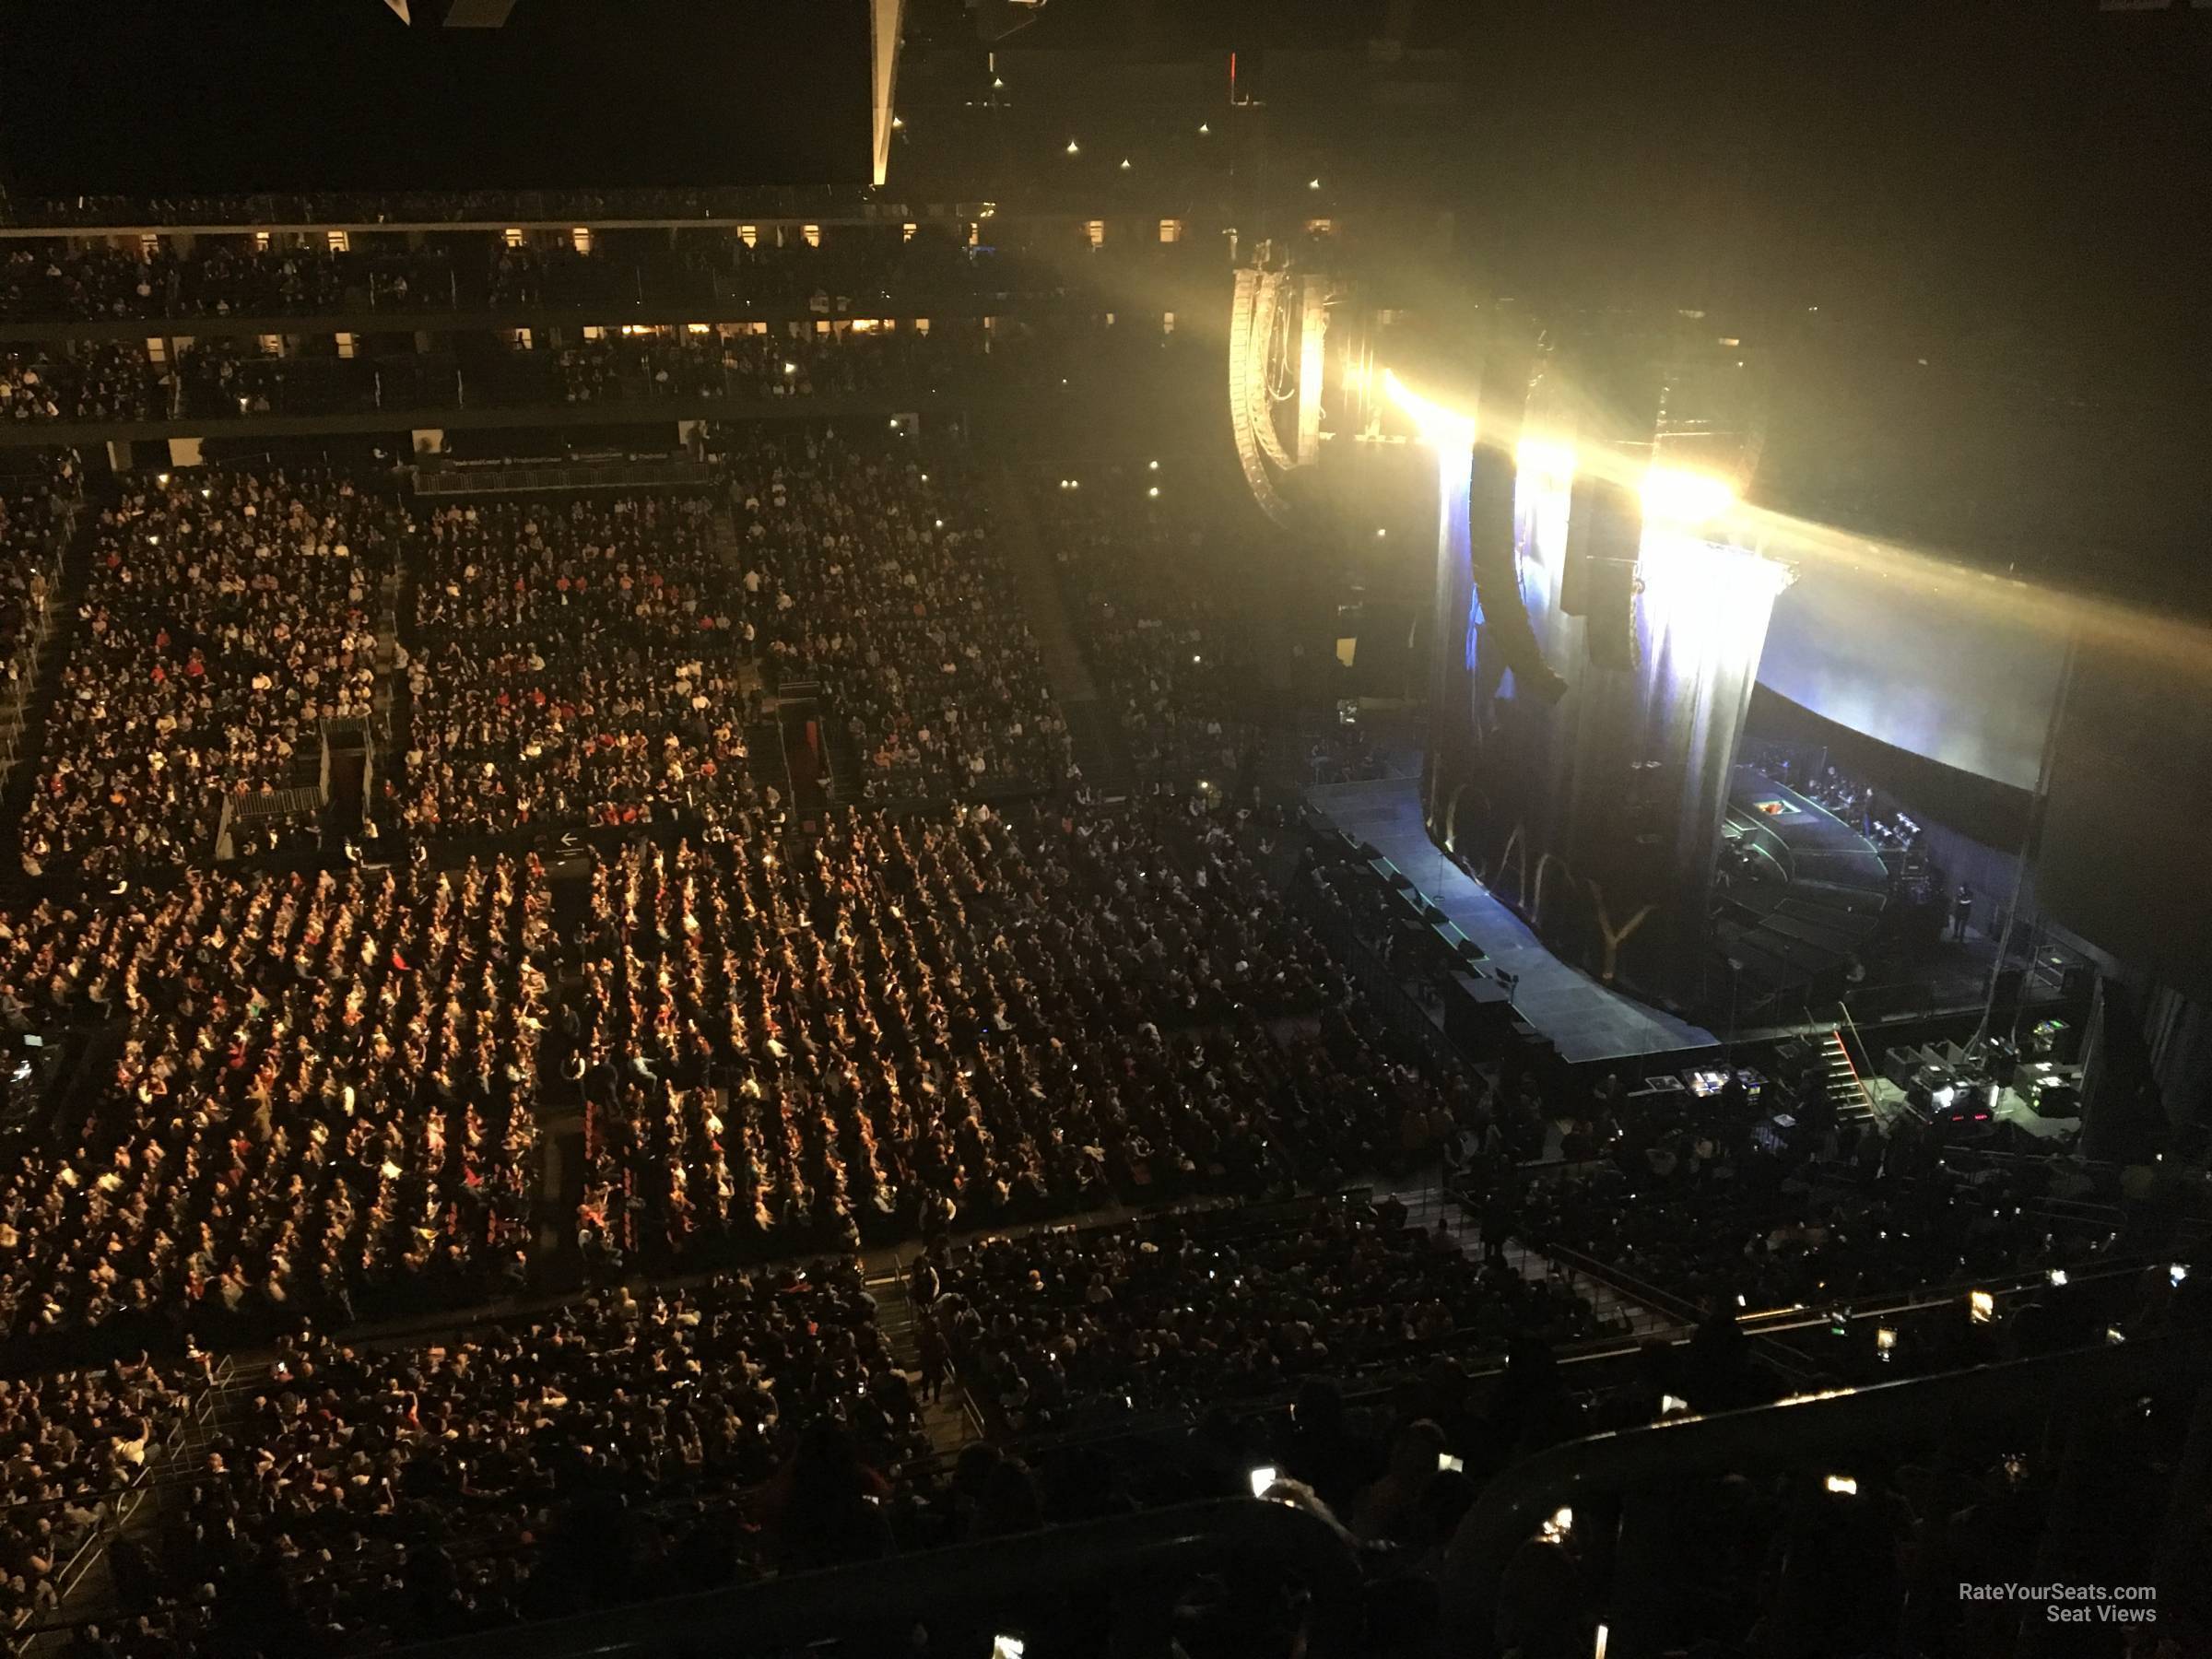 Section 111 at Prudential Center for Concerts